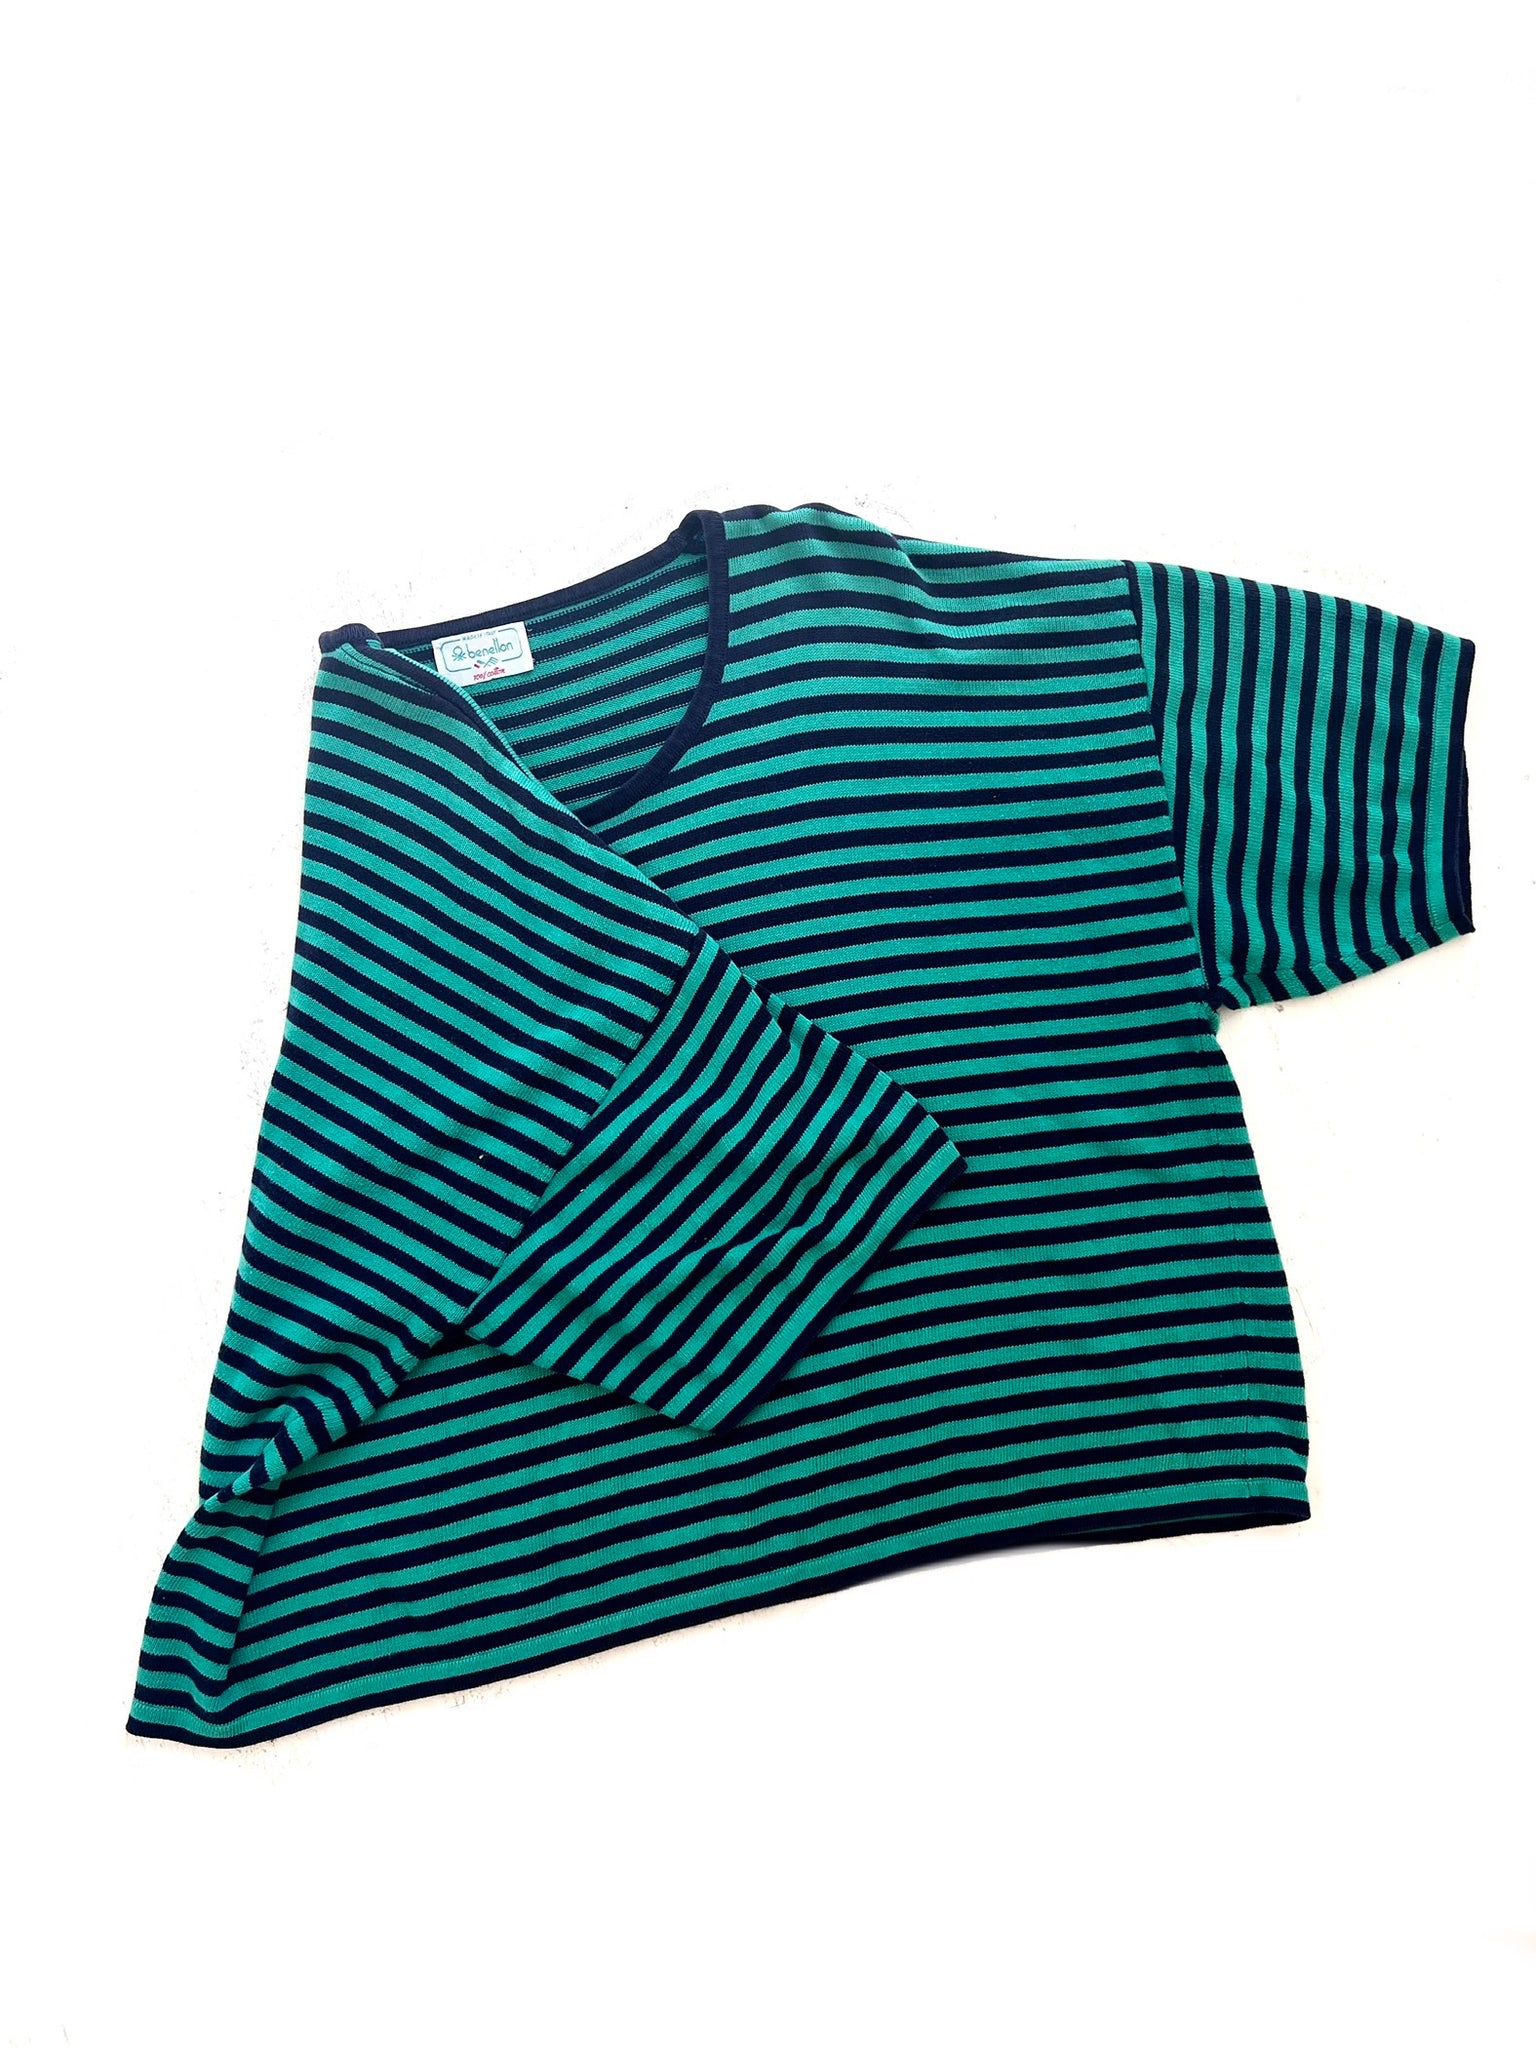 Cotton Striped Sweater T by Benetton